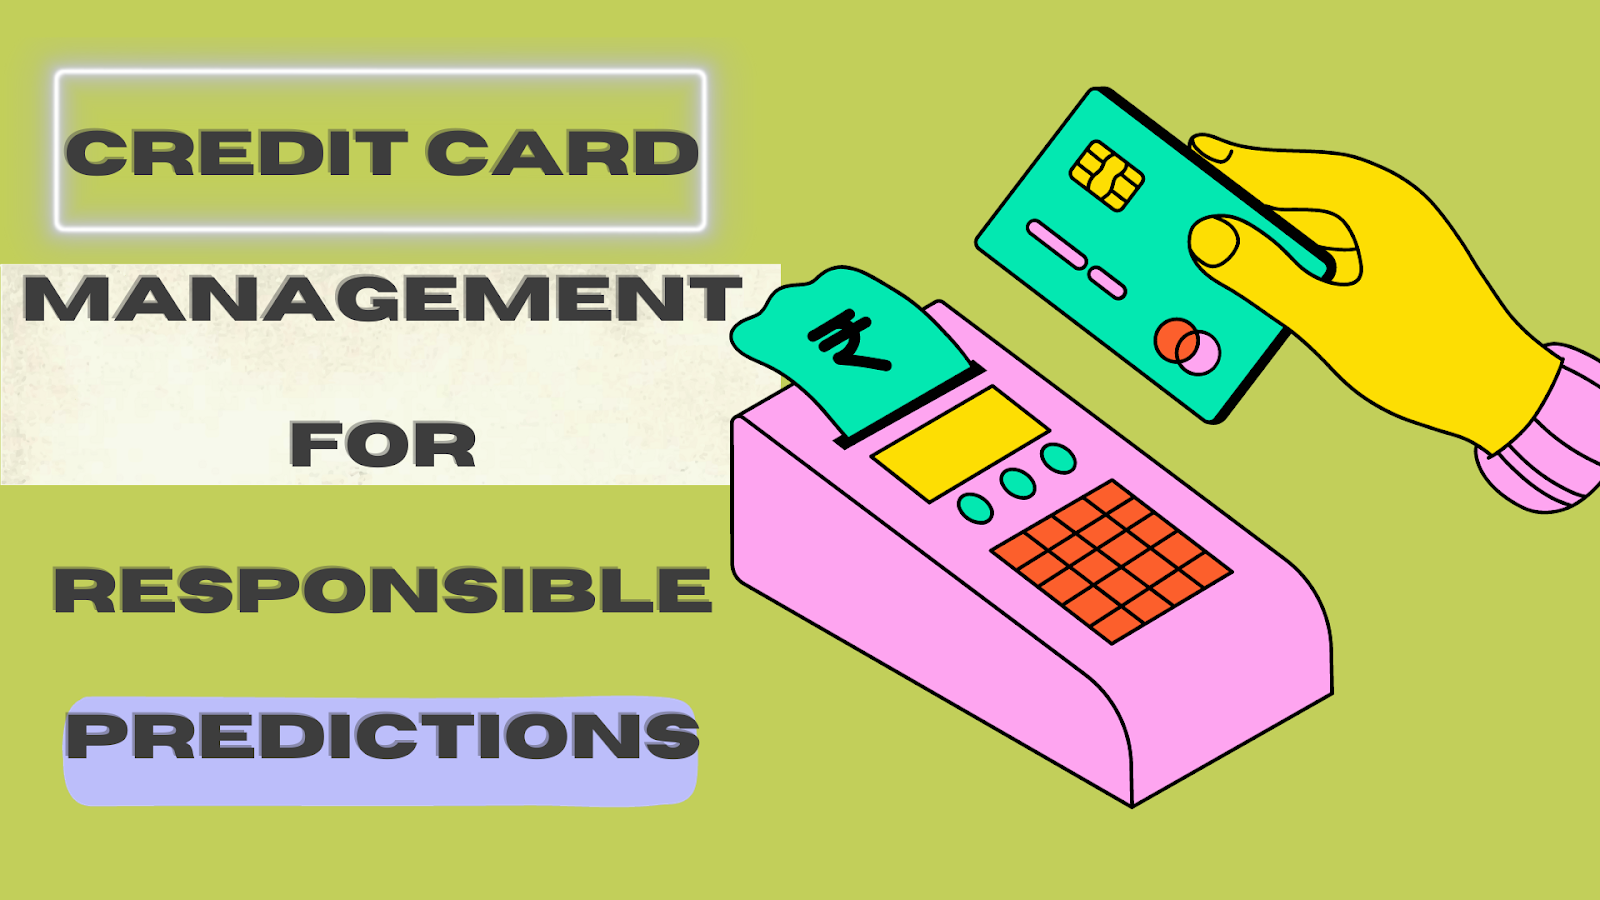 Credit Card Management for Responsible Predictions